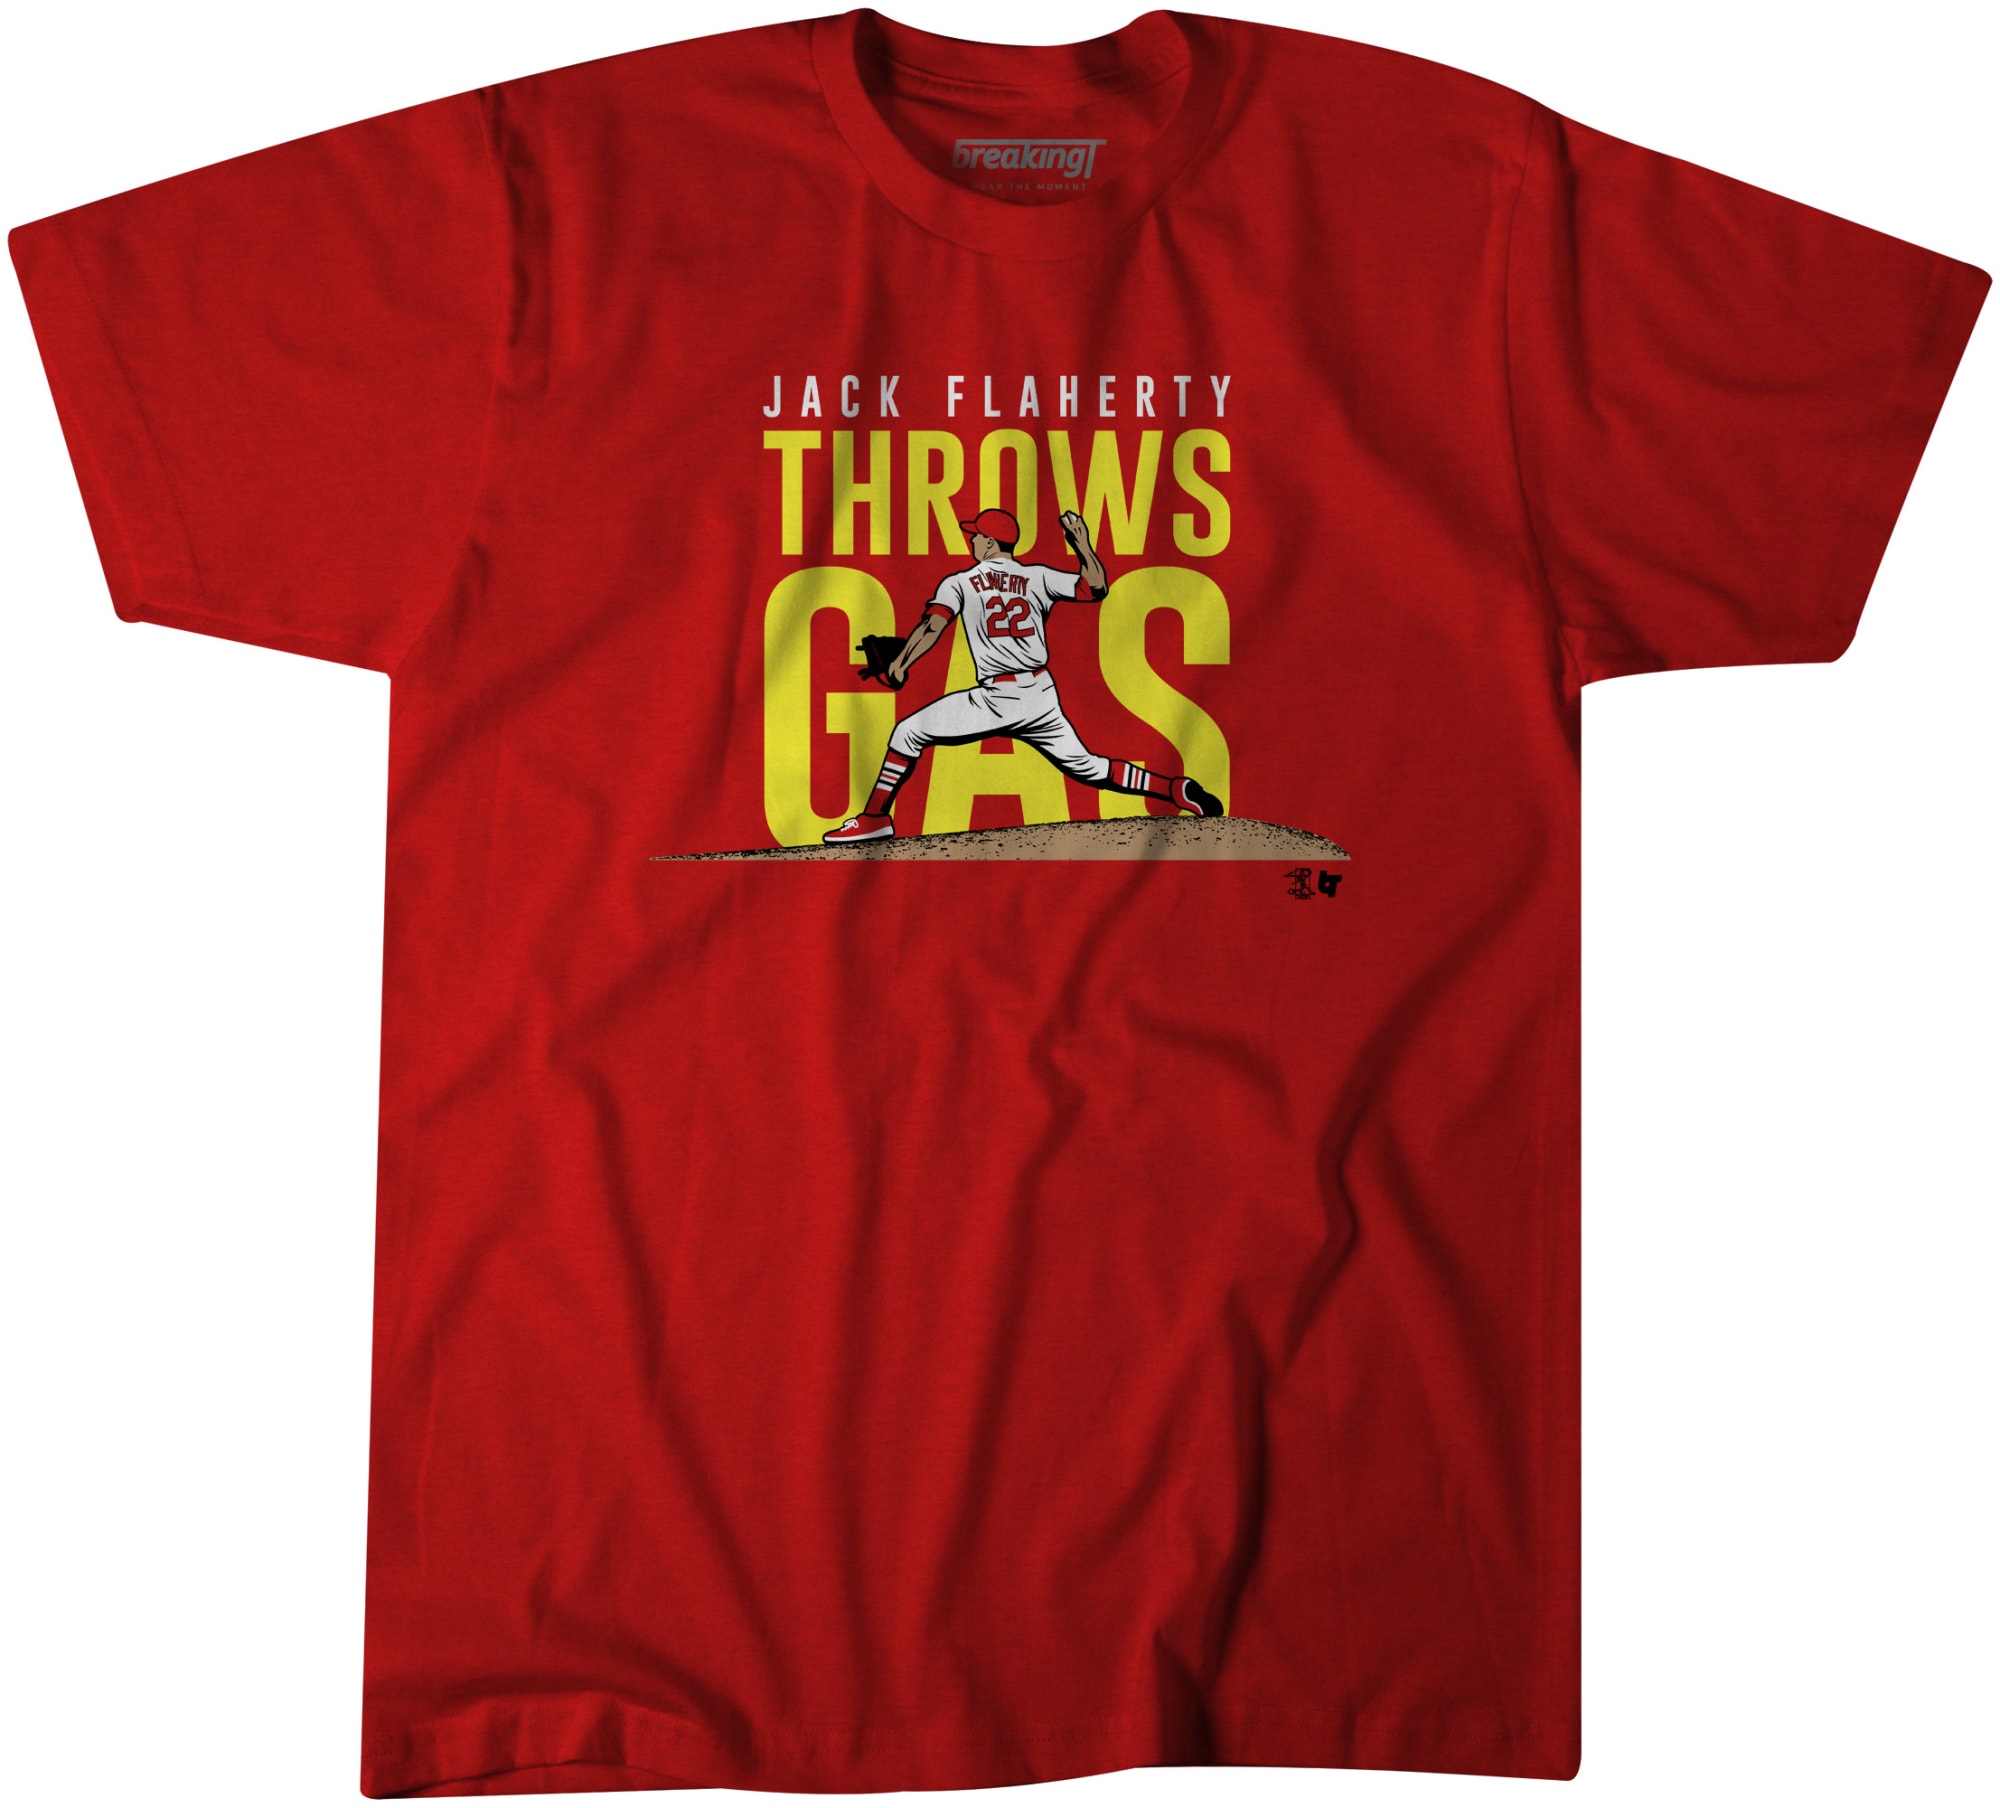 St. Louis Cardinals fans need these shirts for the MLB Postseason